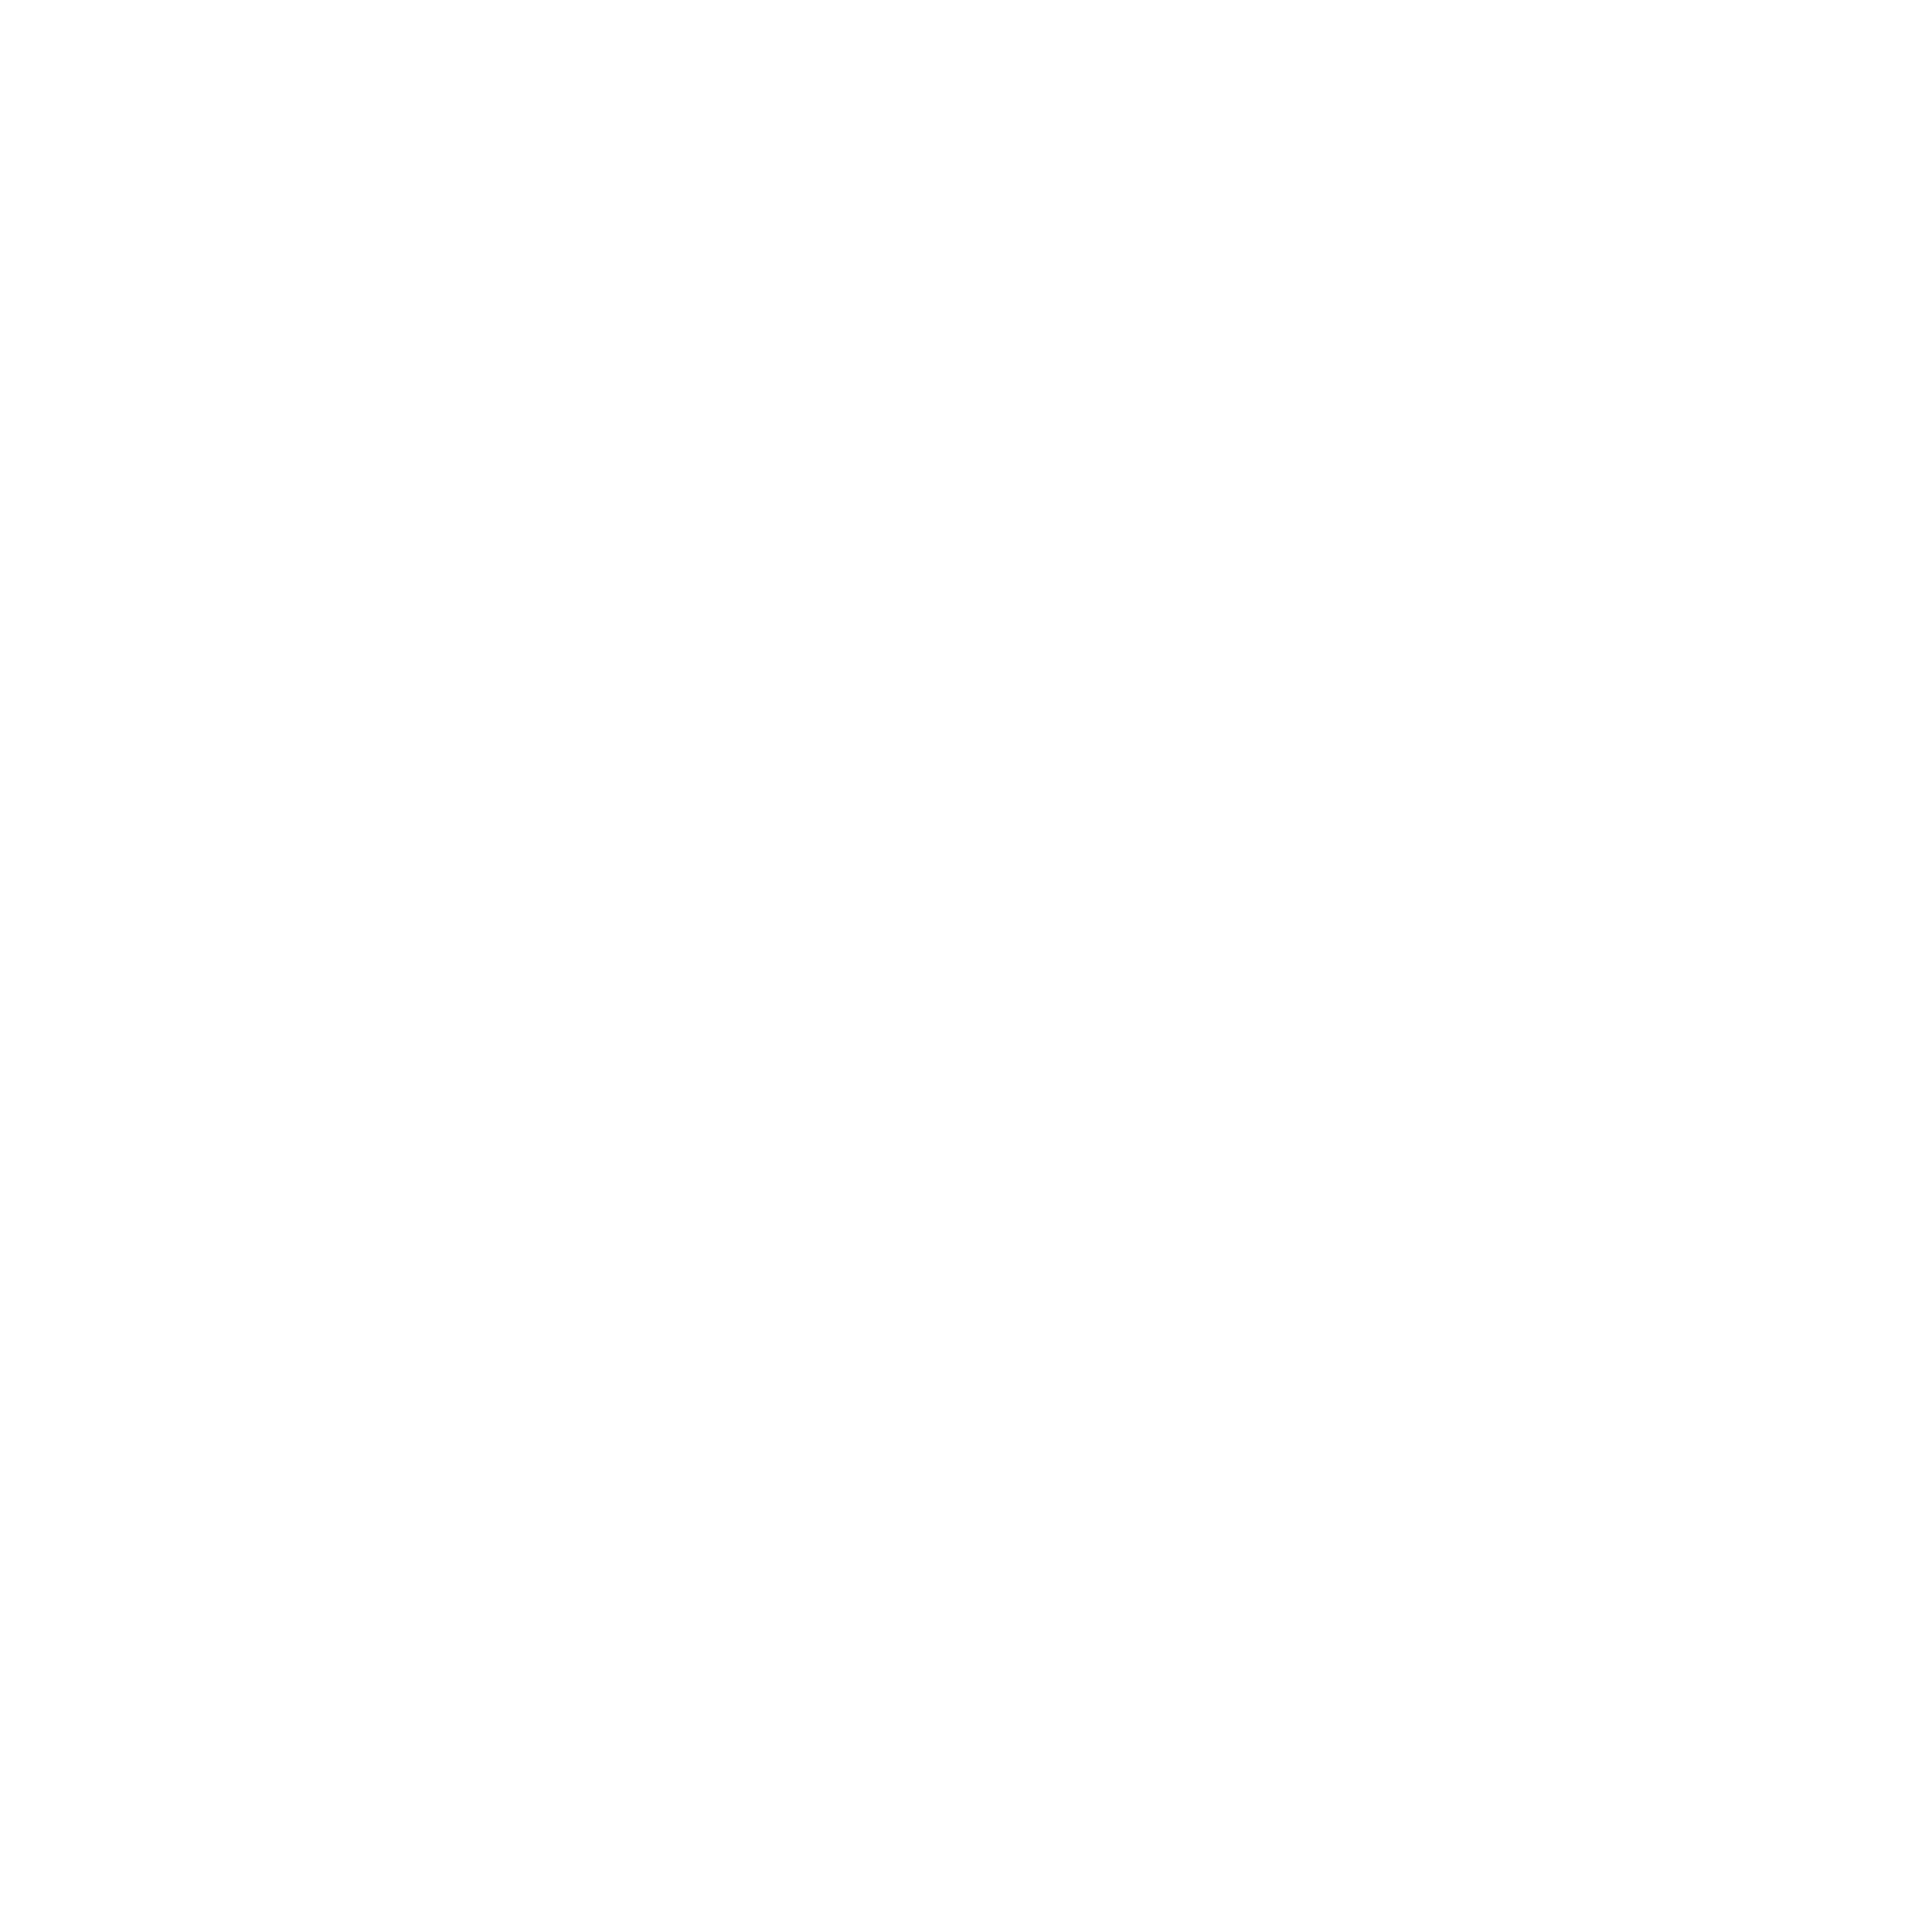 The Listening Party 9: PENNY'S BACKYARD (Day Party)